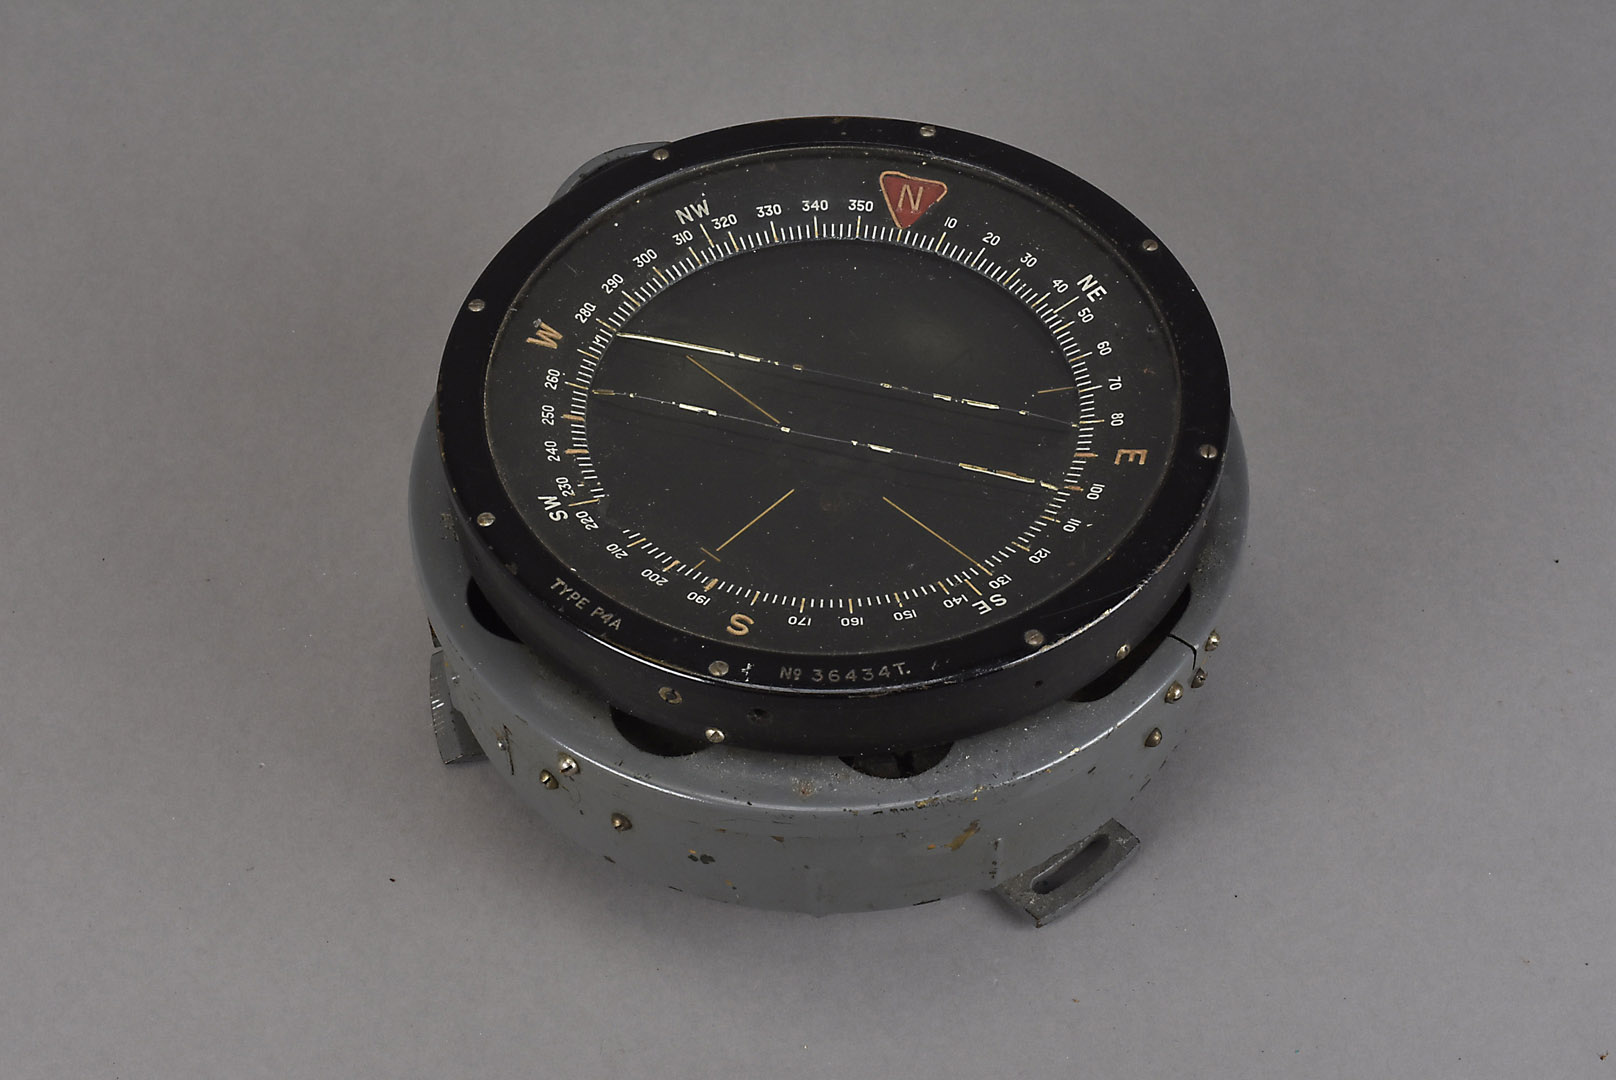 A WWII P4A planes gimbal compass, together with a planes steering wheel, complete with missile and